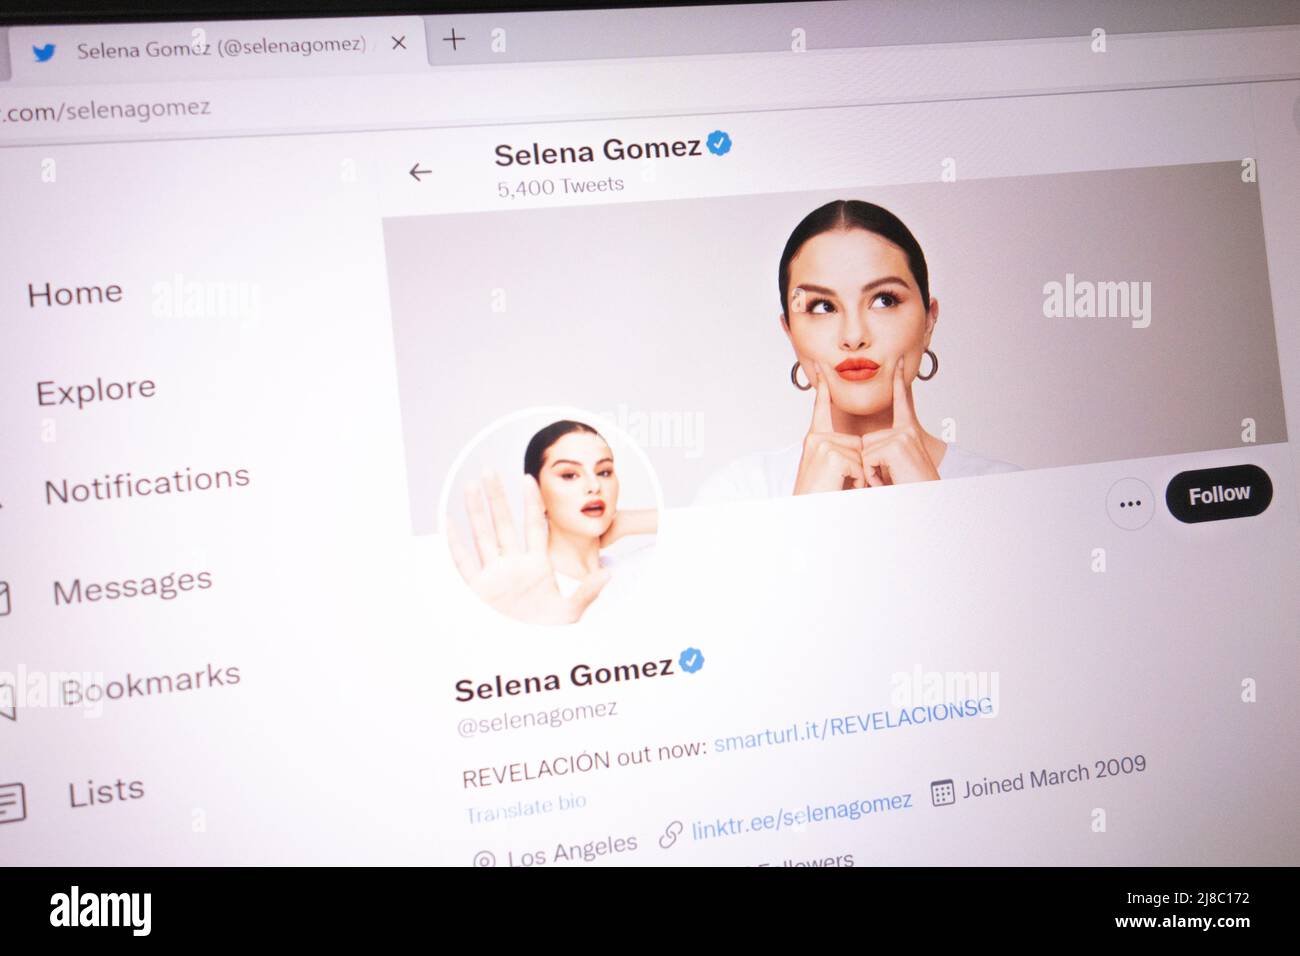 KONSKIE, POLAND - May 14, 2022: Selena Gomez official Twitter account displayed on laptop screen Stock Photo